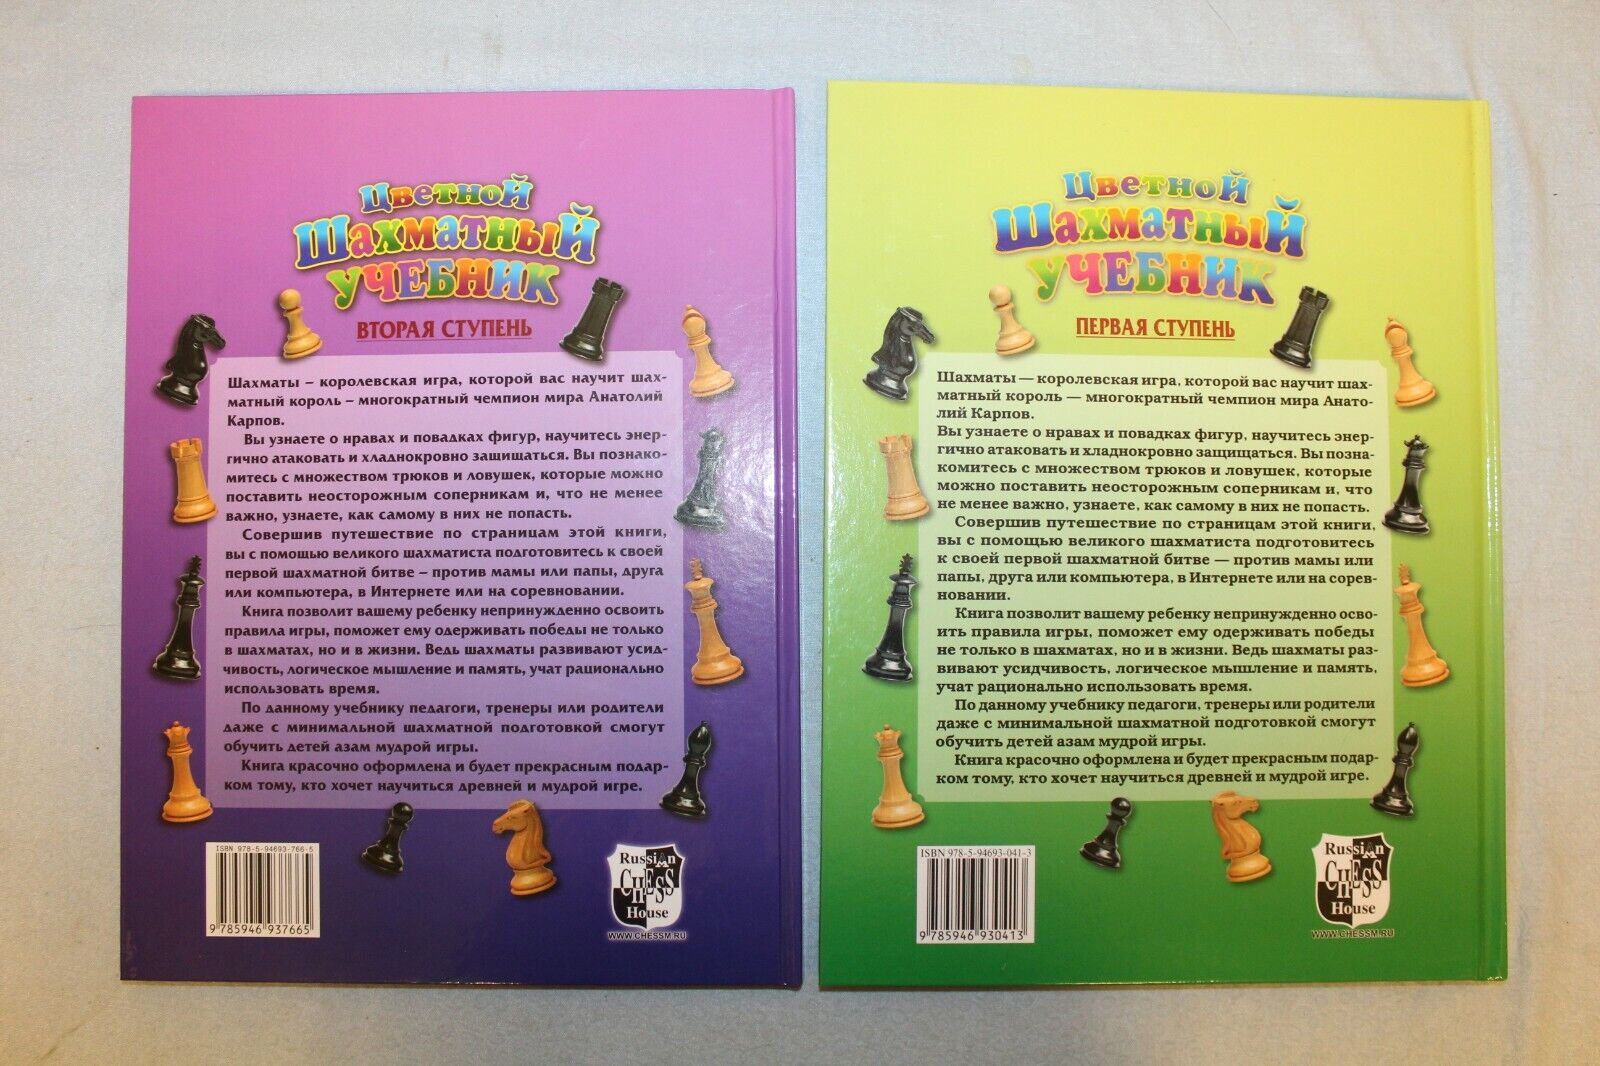 10704.2 Vol. Karpov's Colorf Chess Tutorial. Kids Children. Very large! Coated paper